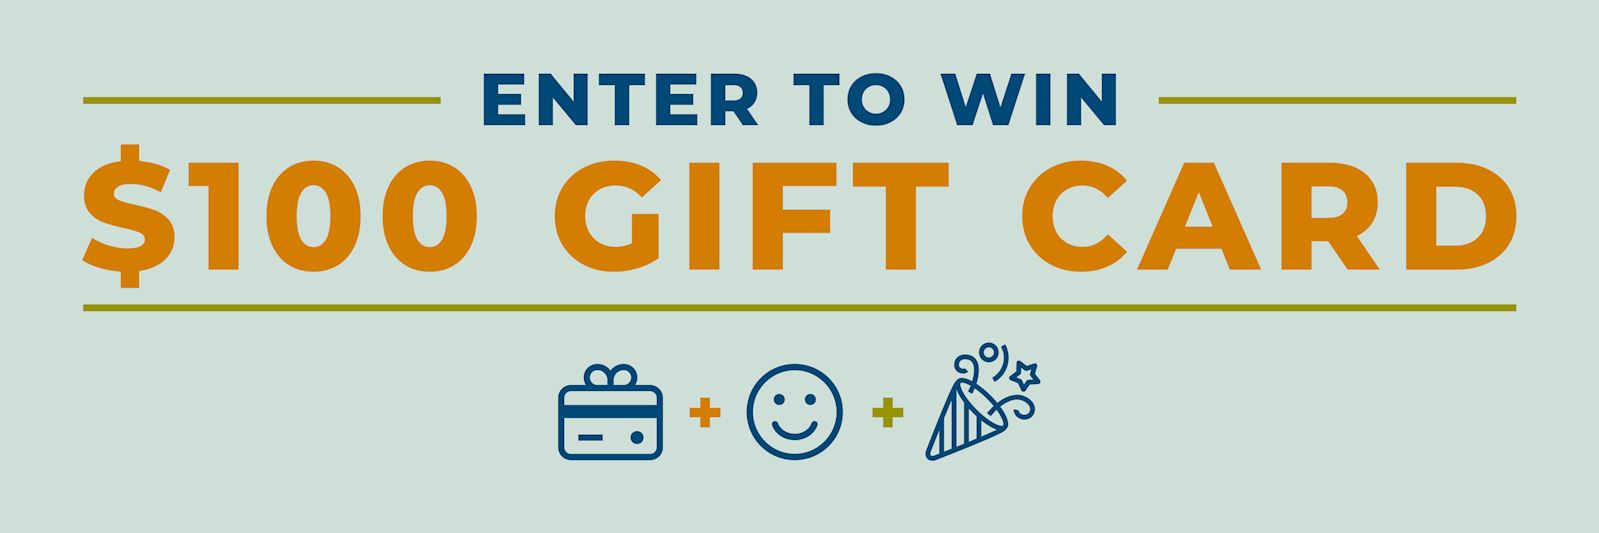 Enter to win a $100 gift card